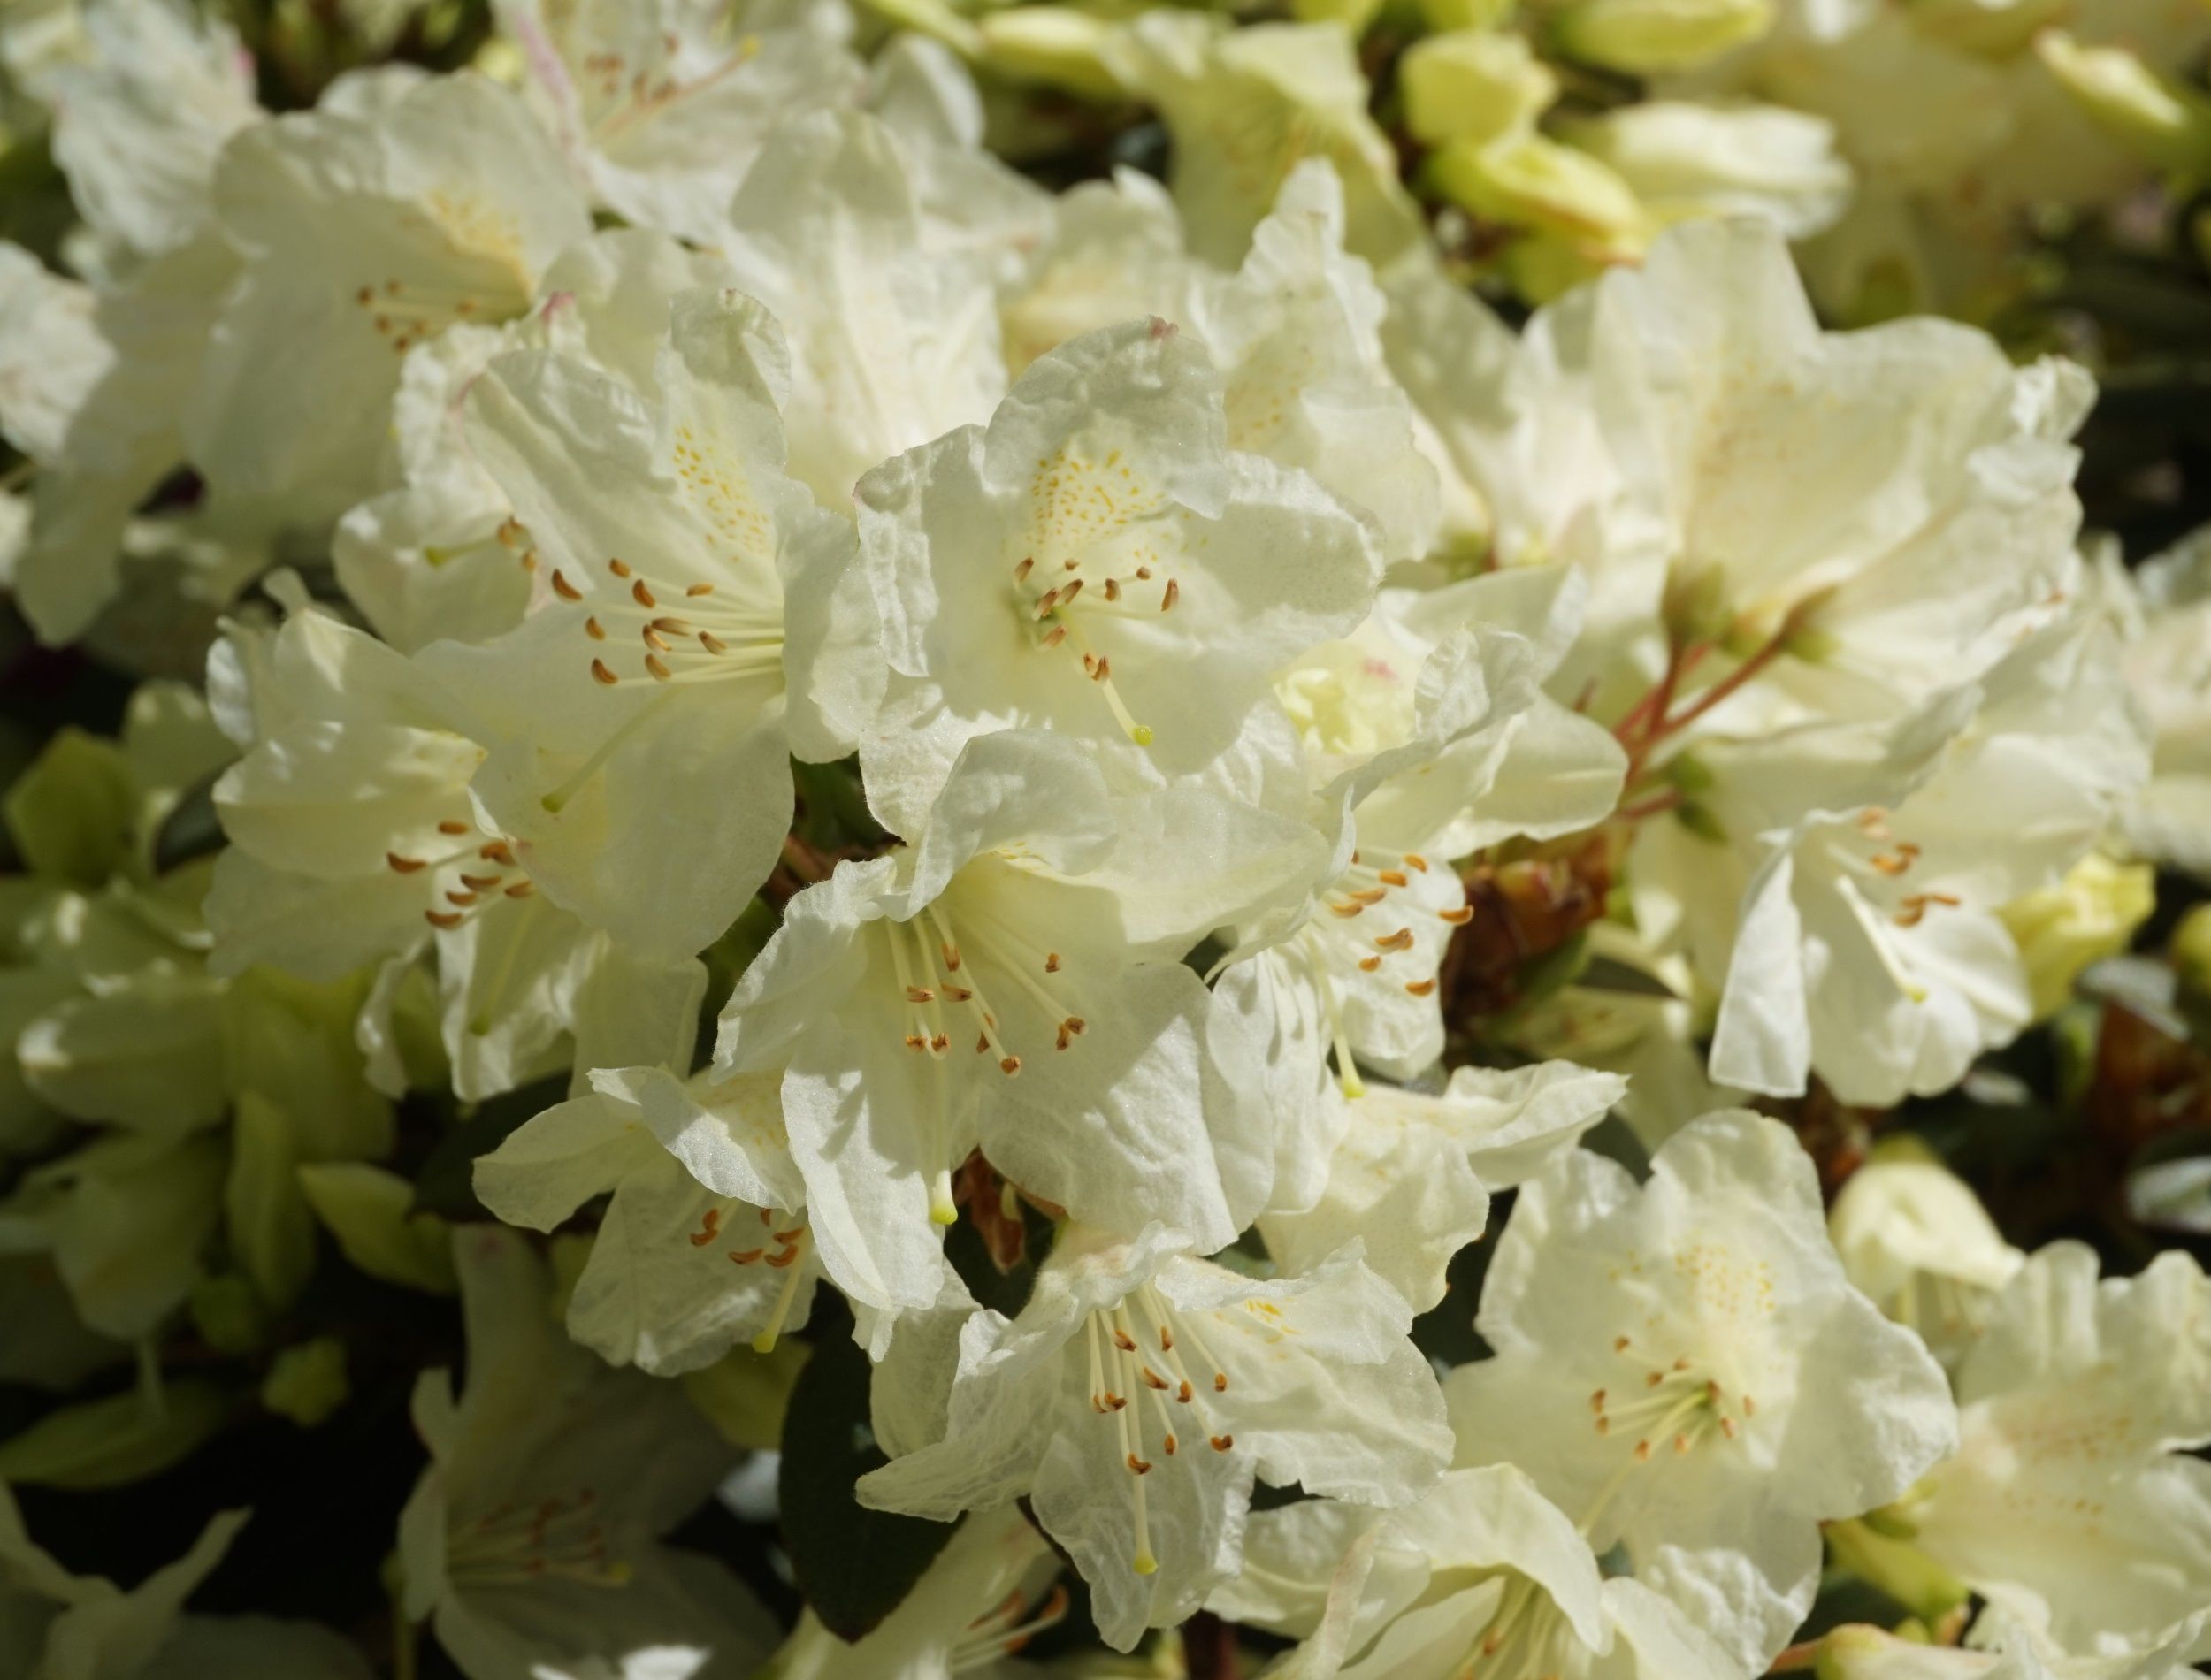 Rhododendron 'Towhead' pale blonde flowers